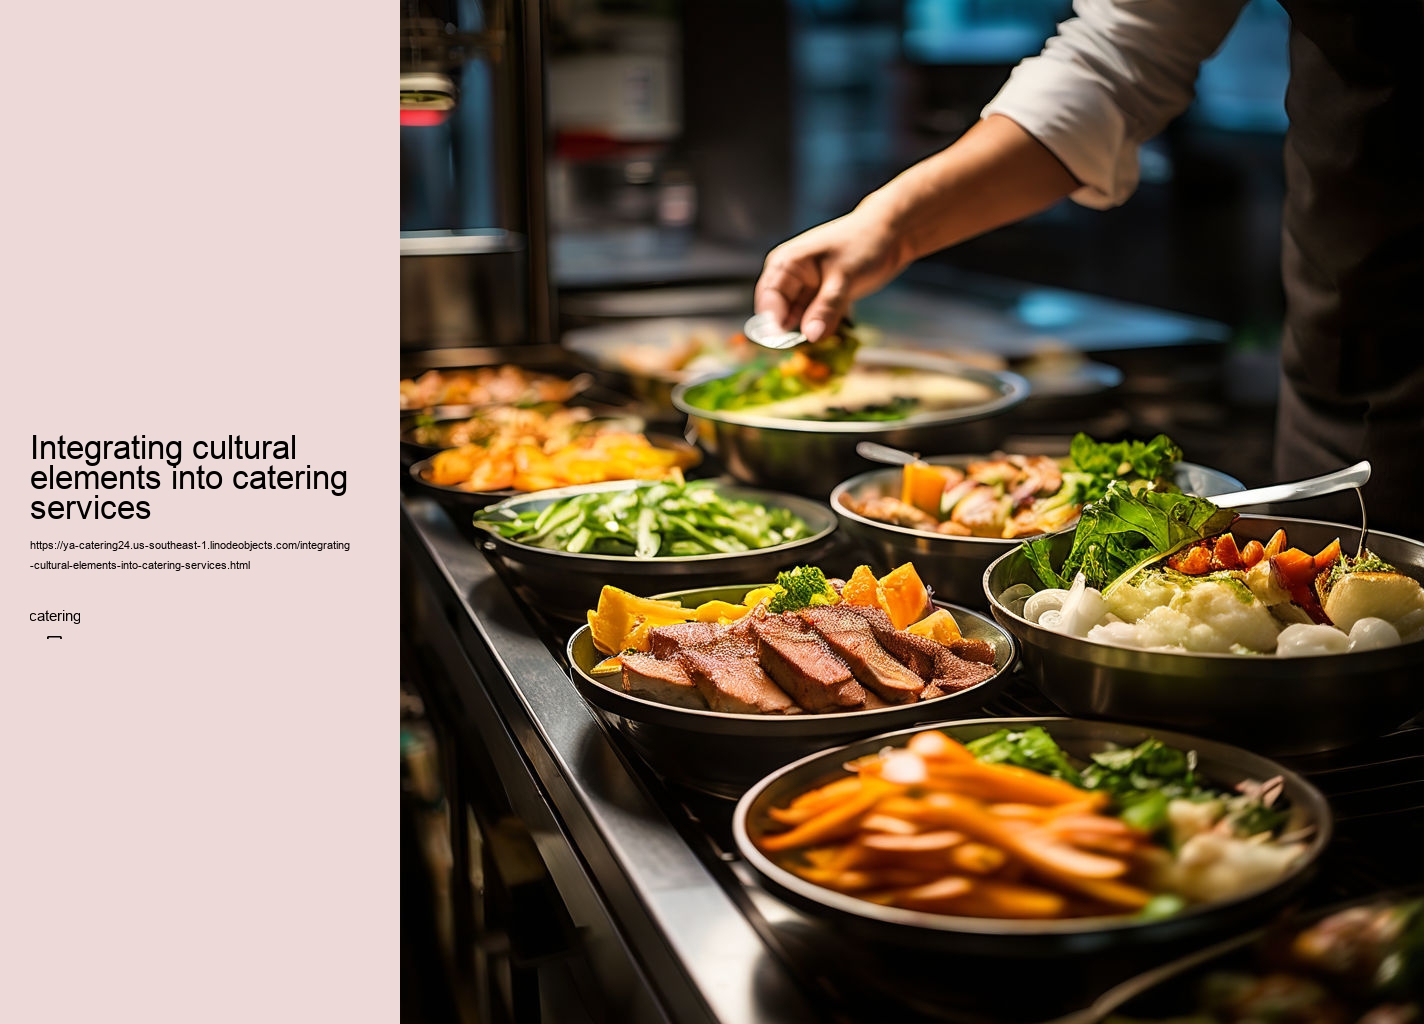 Integrating cultural elements into catering services